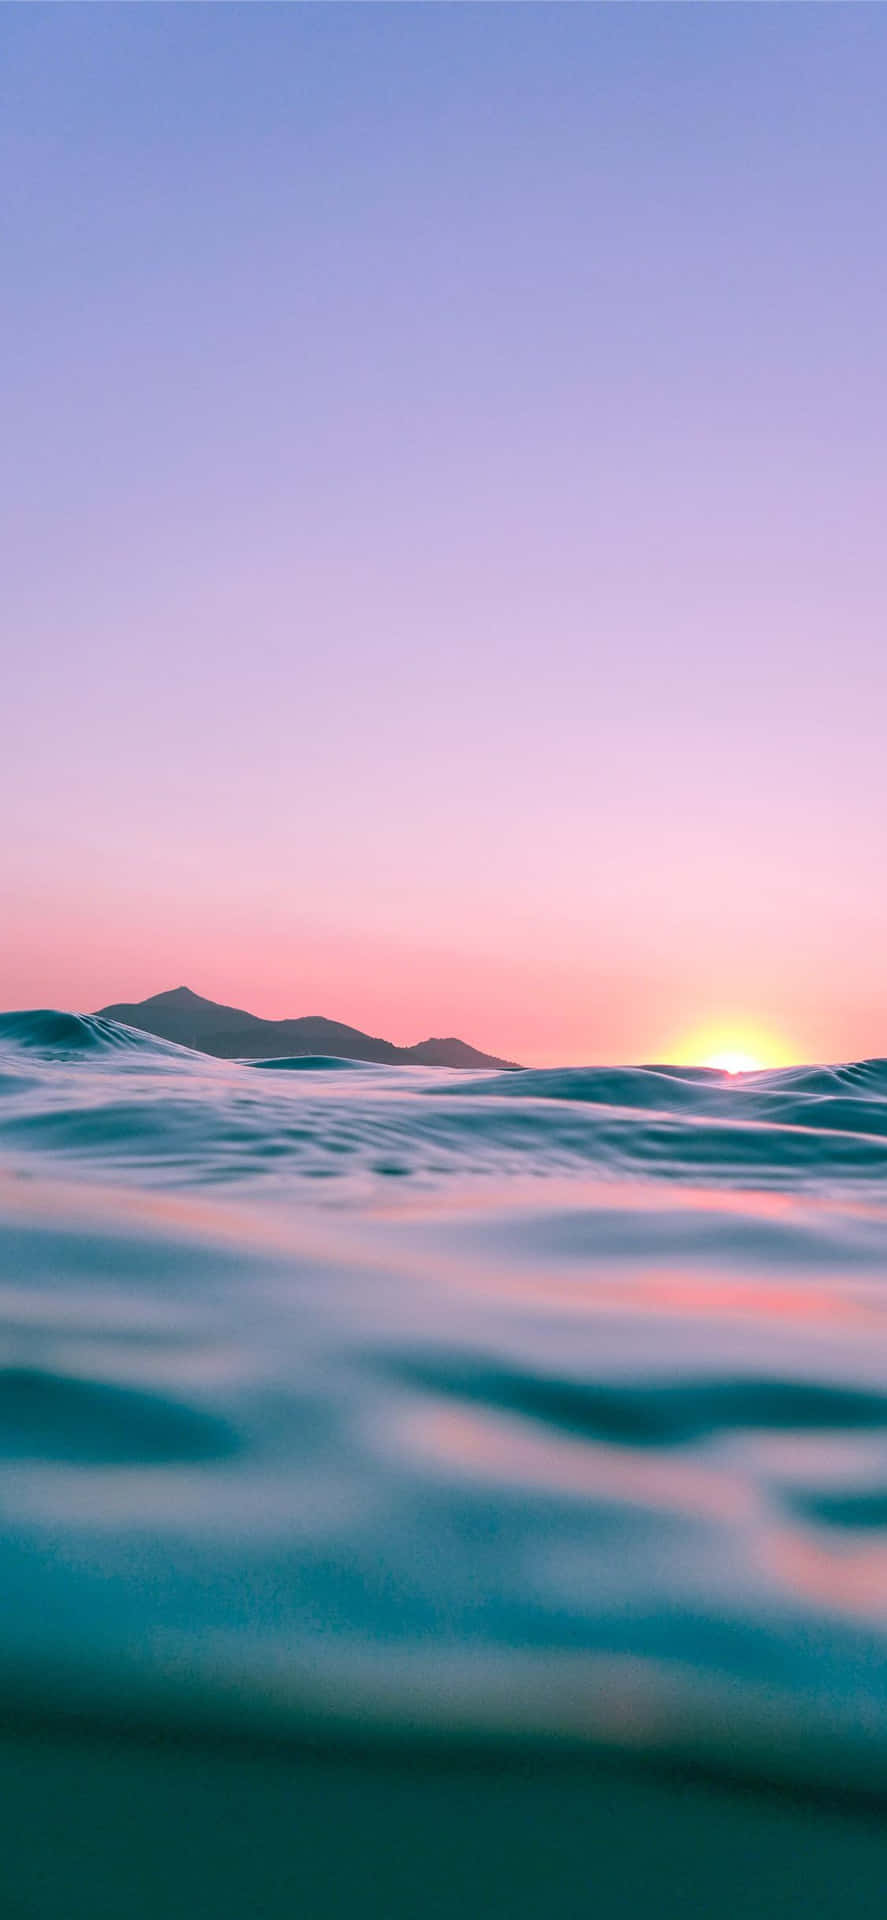 A Sunset Over The Ocean With Waves And Mountains Wallpaper